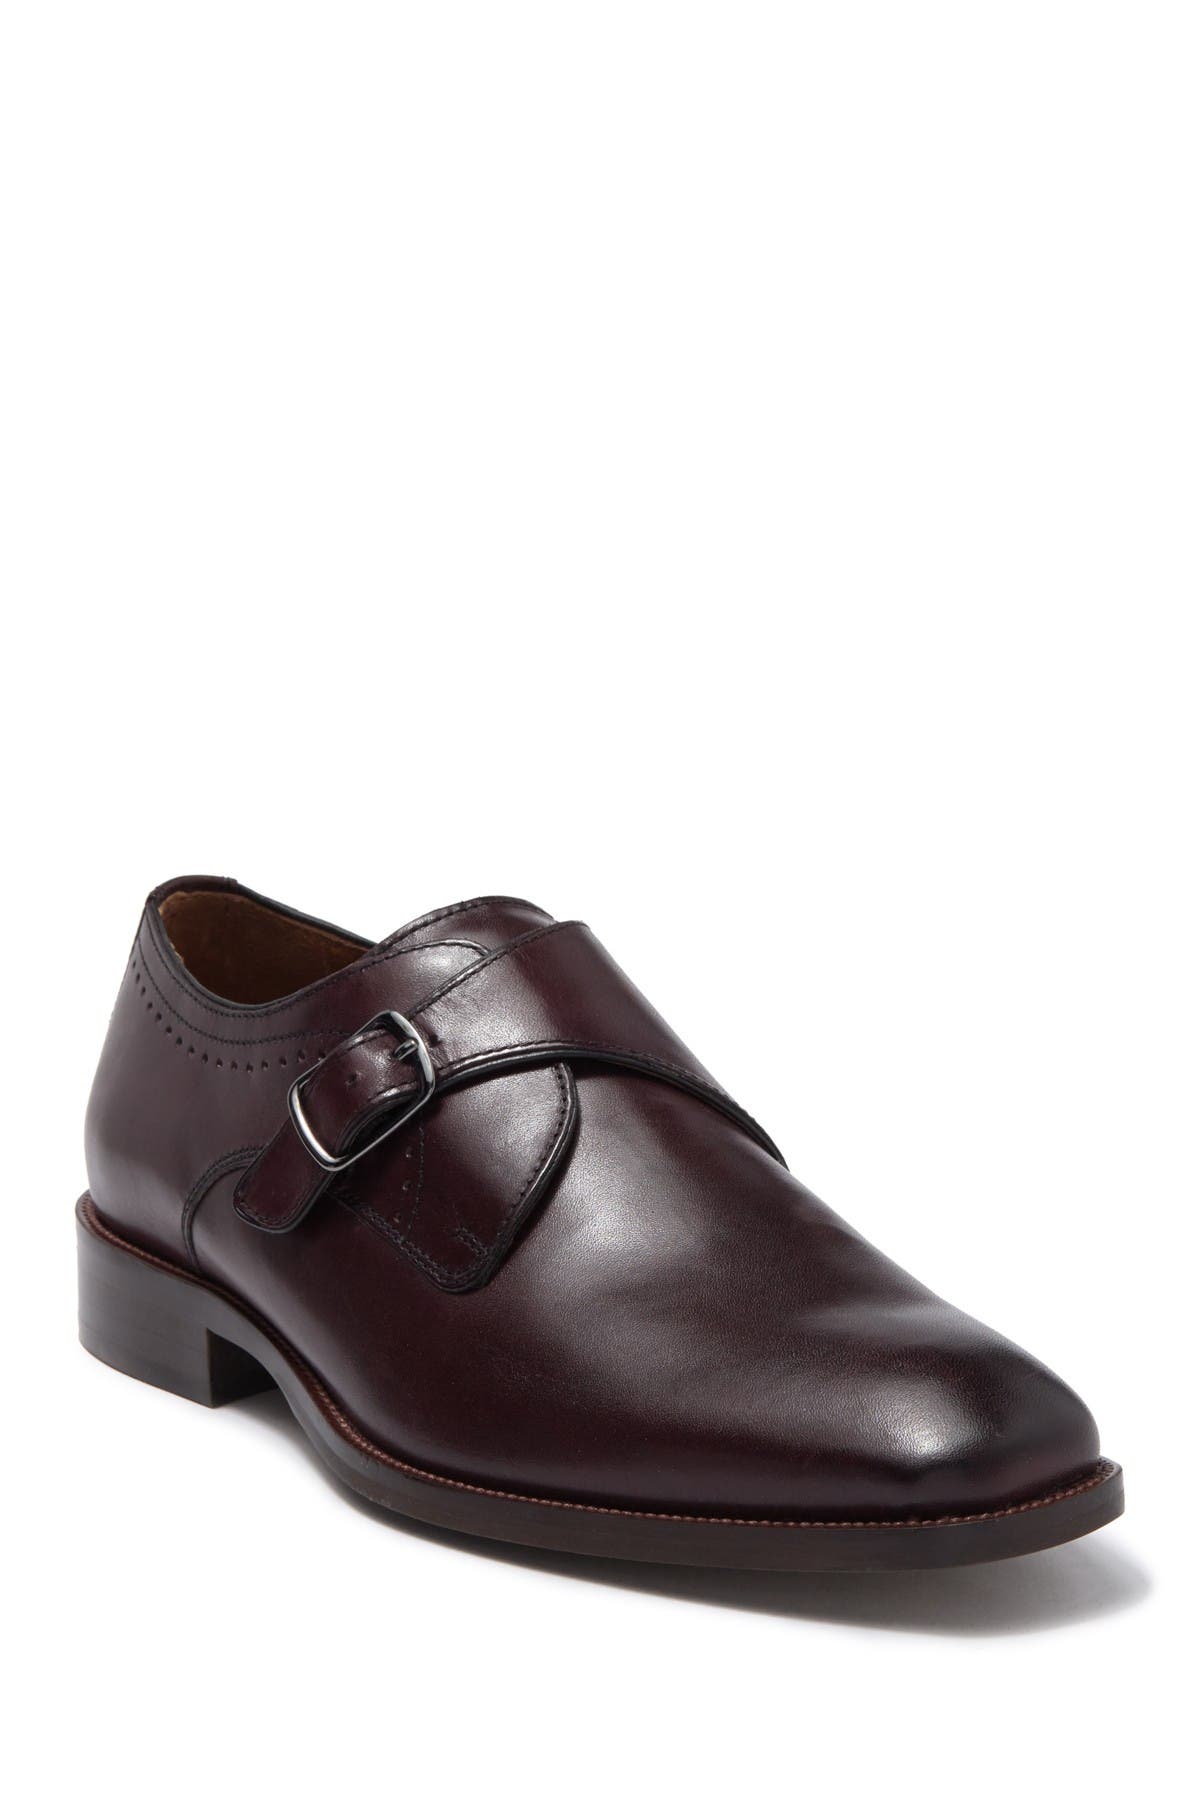 johnston and murphy buckle shoes